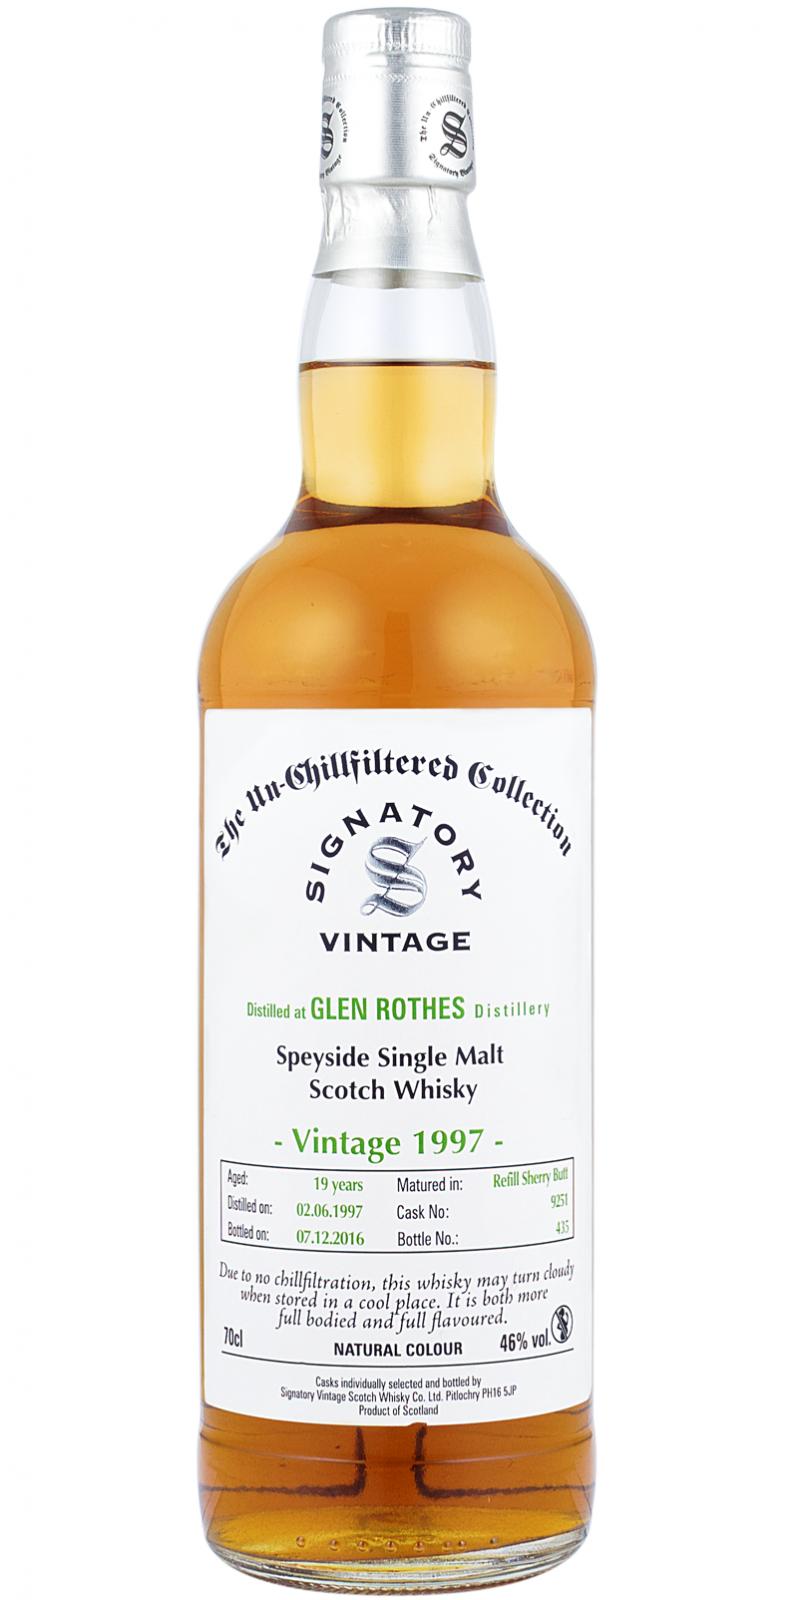 Glenrothes 1997 SV The Un-Chillfiltered Collection Refill Sherry Butt #9251 46% 700ml